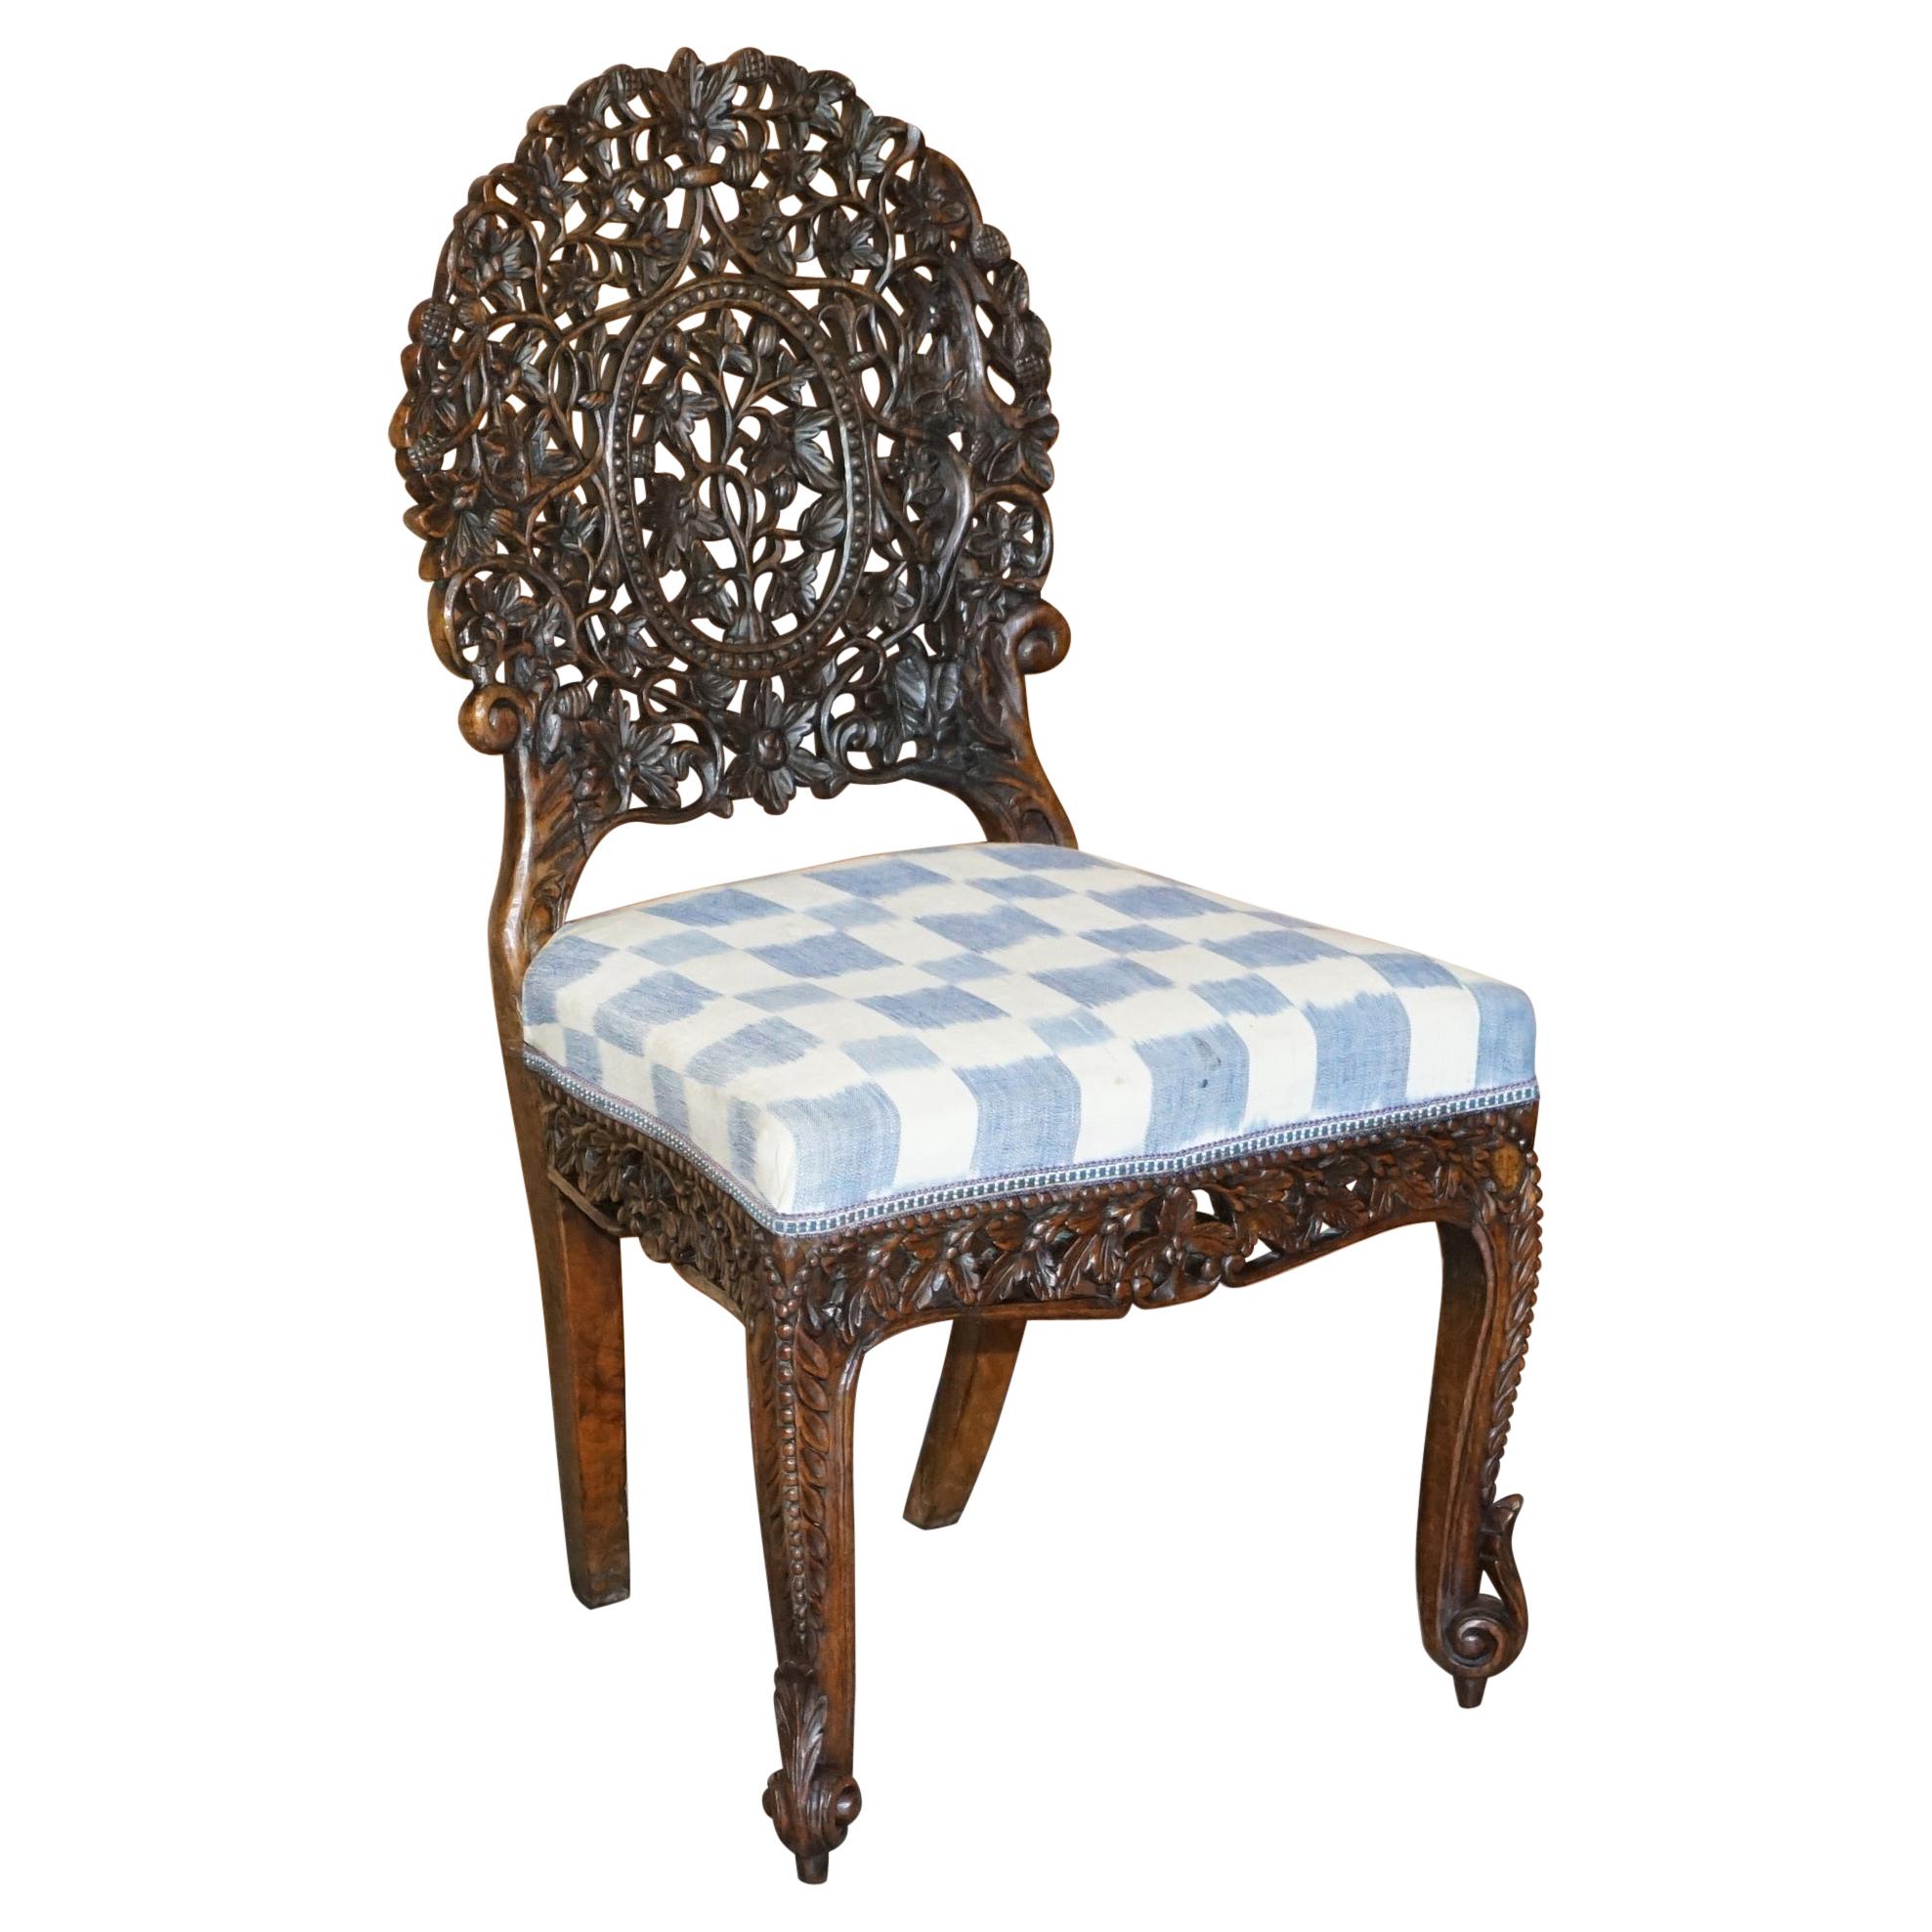 Lovely Hardwood Hand Carved Anglo Indian Burmese Chair with Floral Detailing